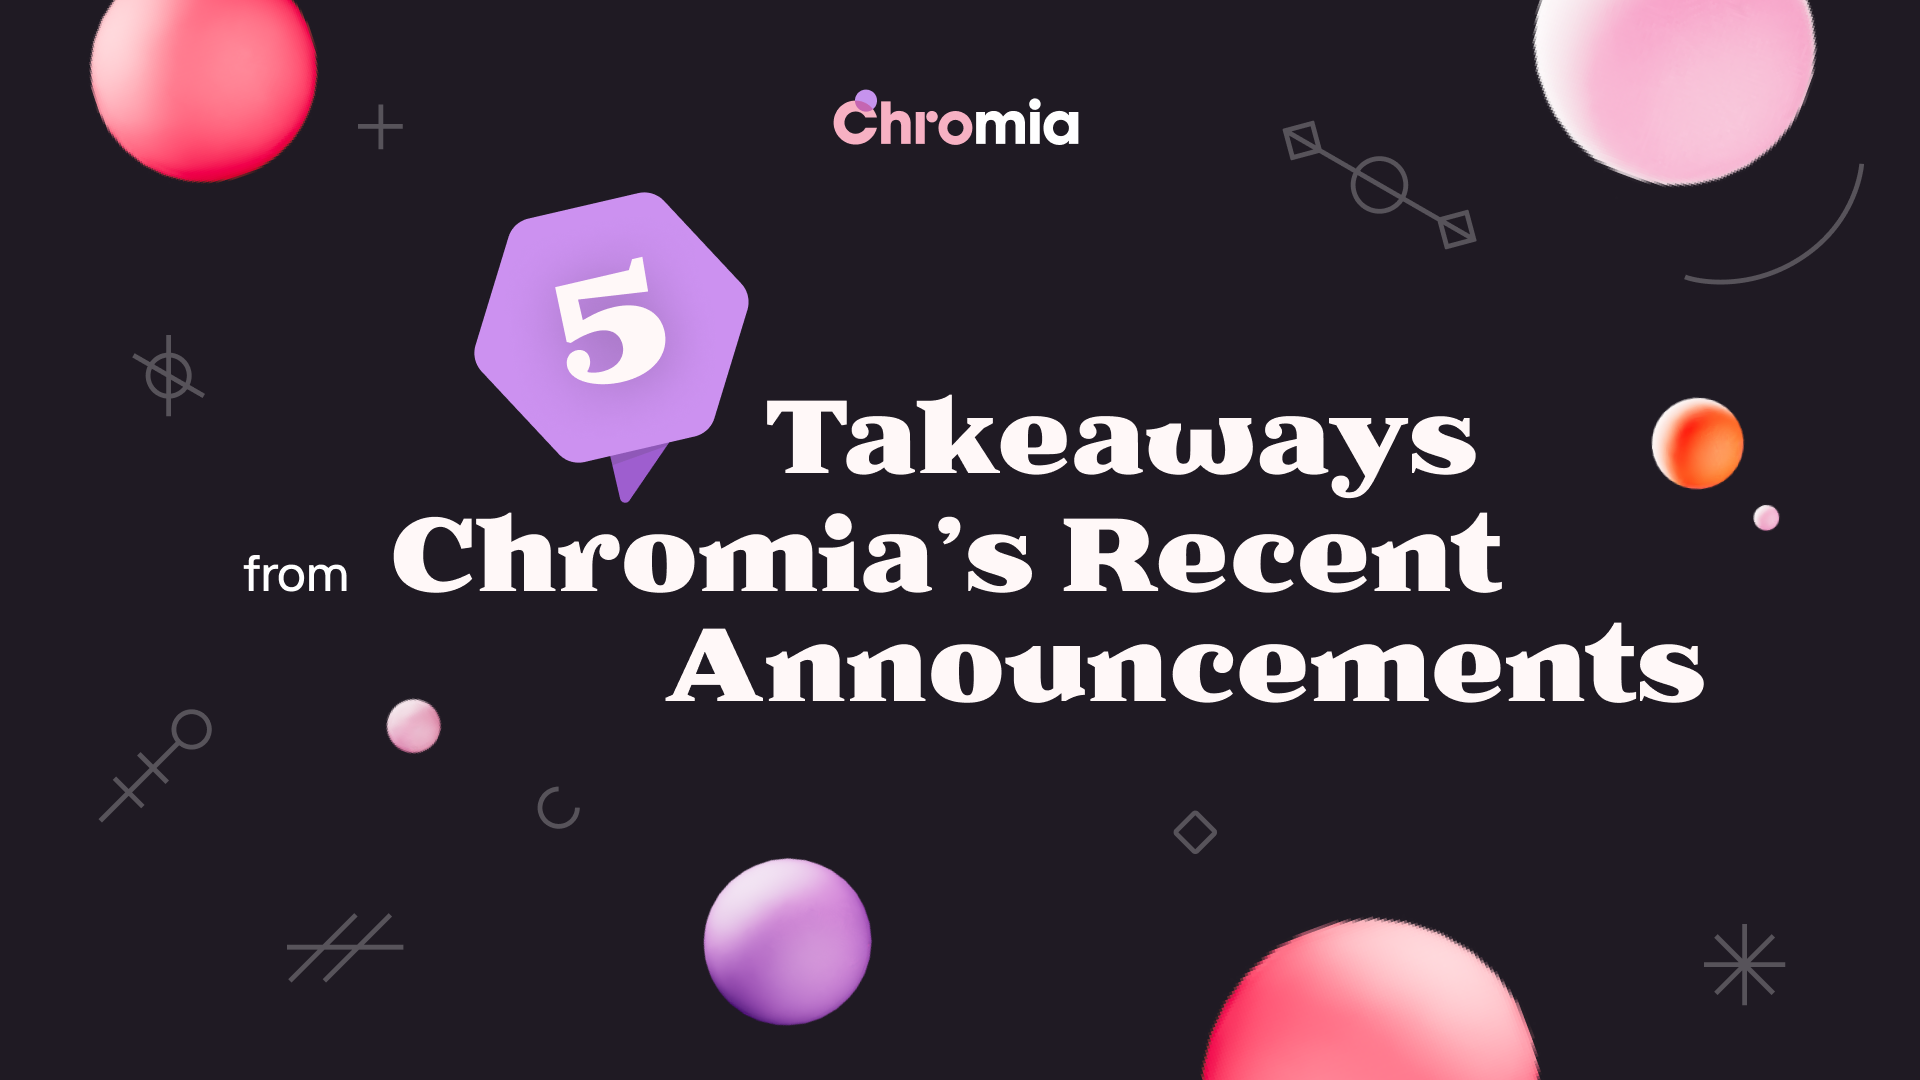 5 Takeaways from Chromia’s Recent Announcements